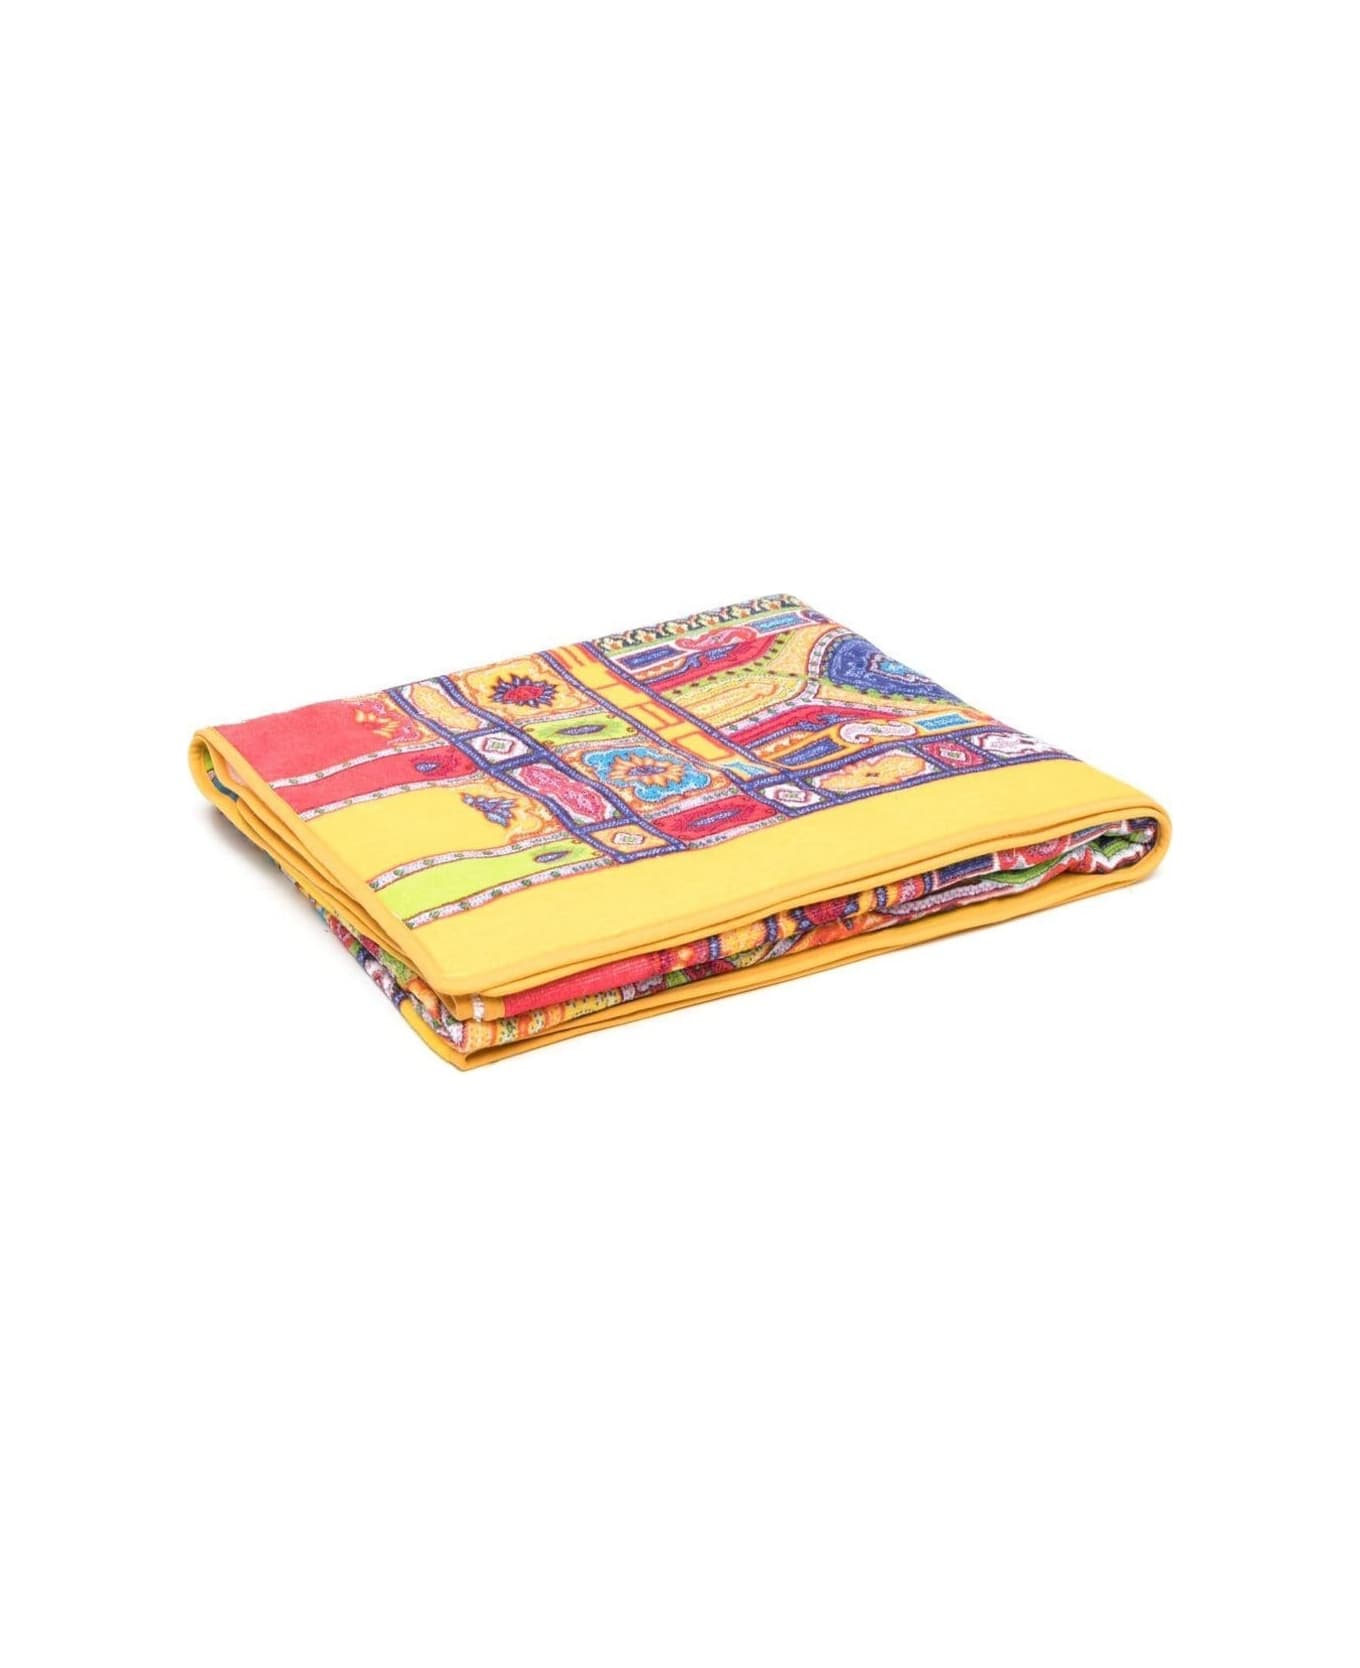 Etro Multicolor Beach Towel With Paisley Ornamental Print In Cotton Terry Home - Yellow